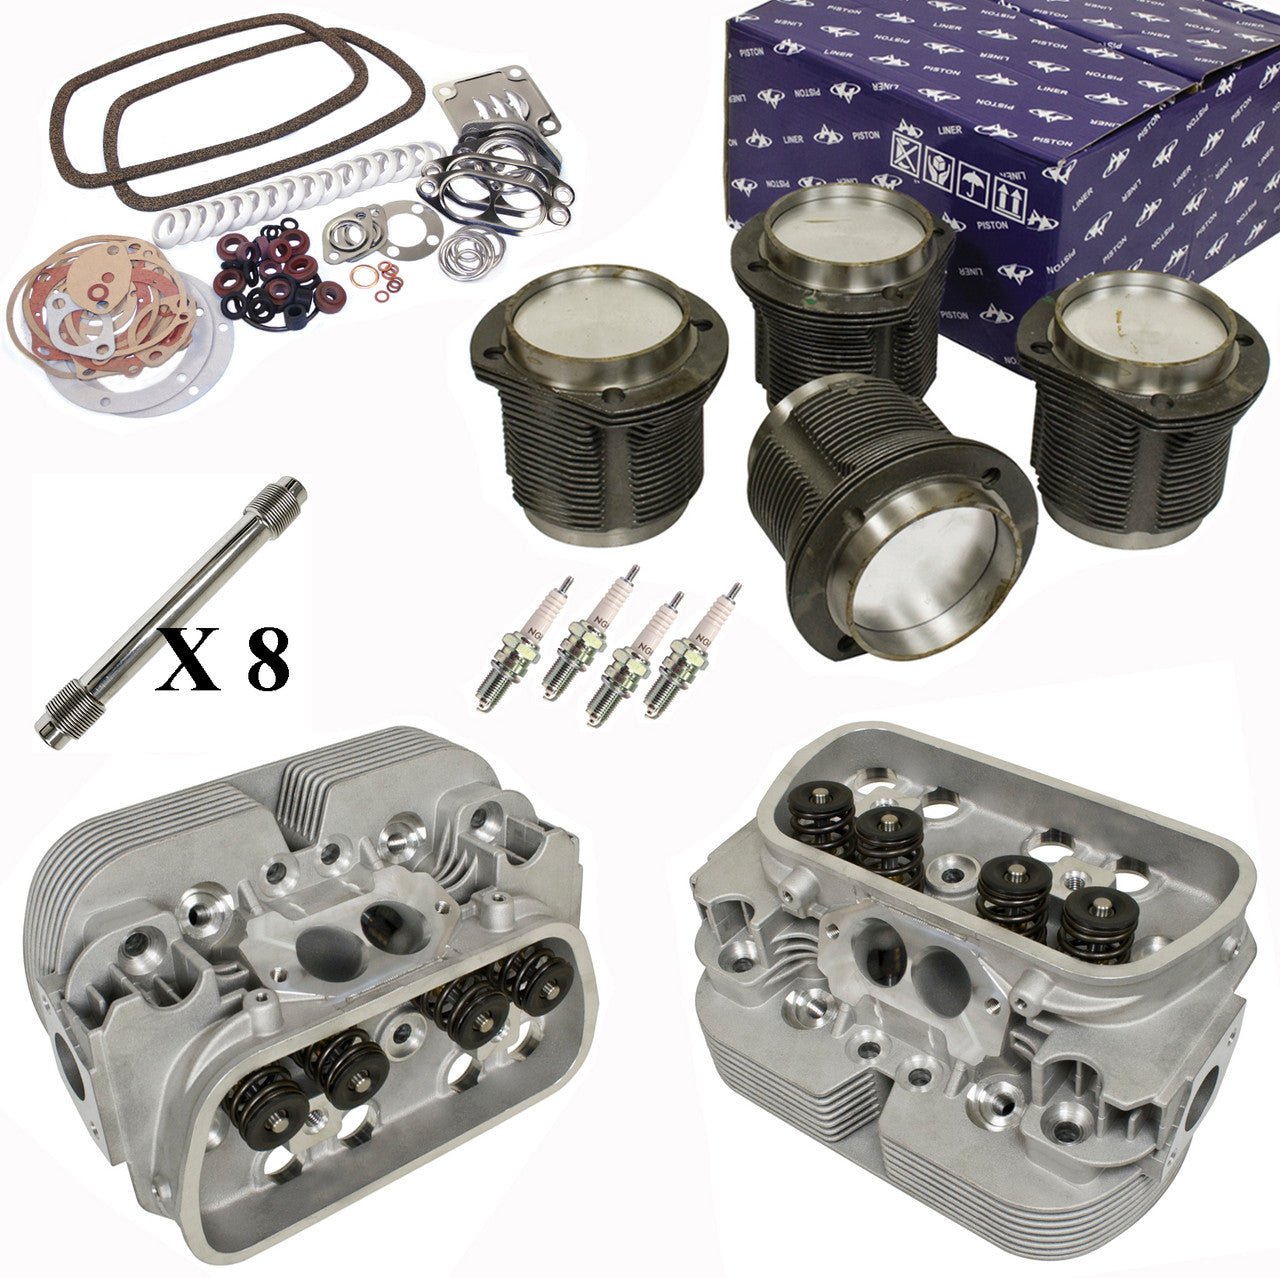 Vw Bug Engine Kit Hi Performance 1776cc With Racing Cylinder Heads Top End Only